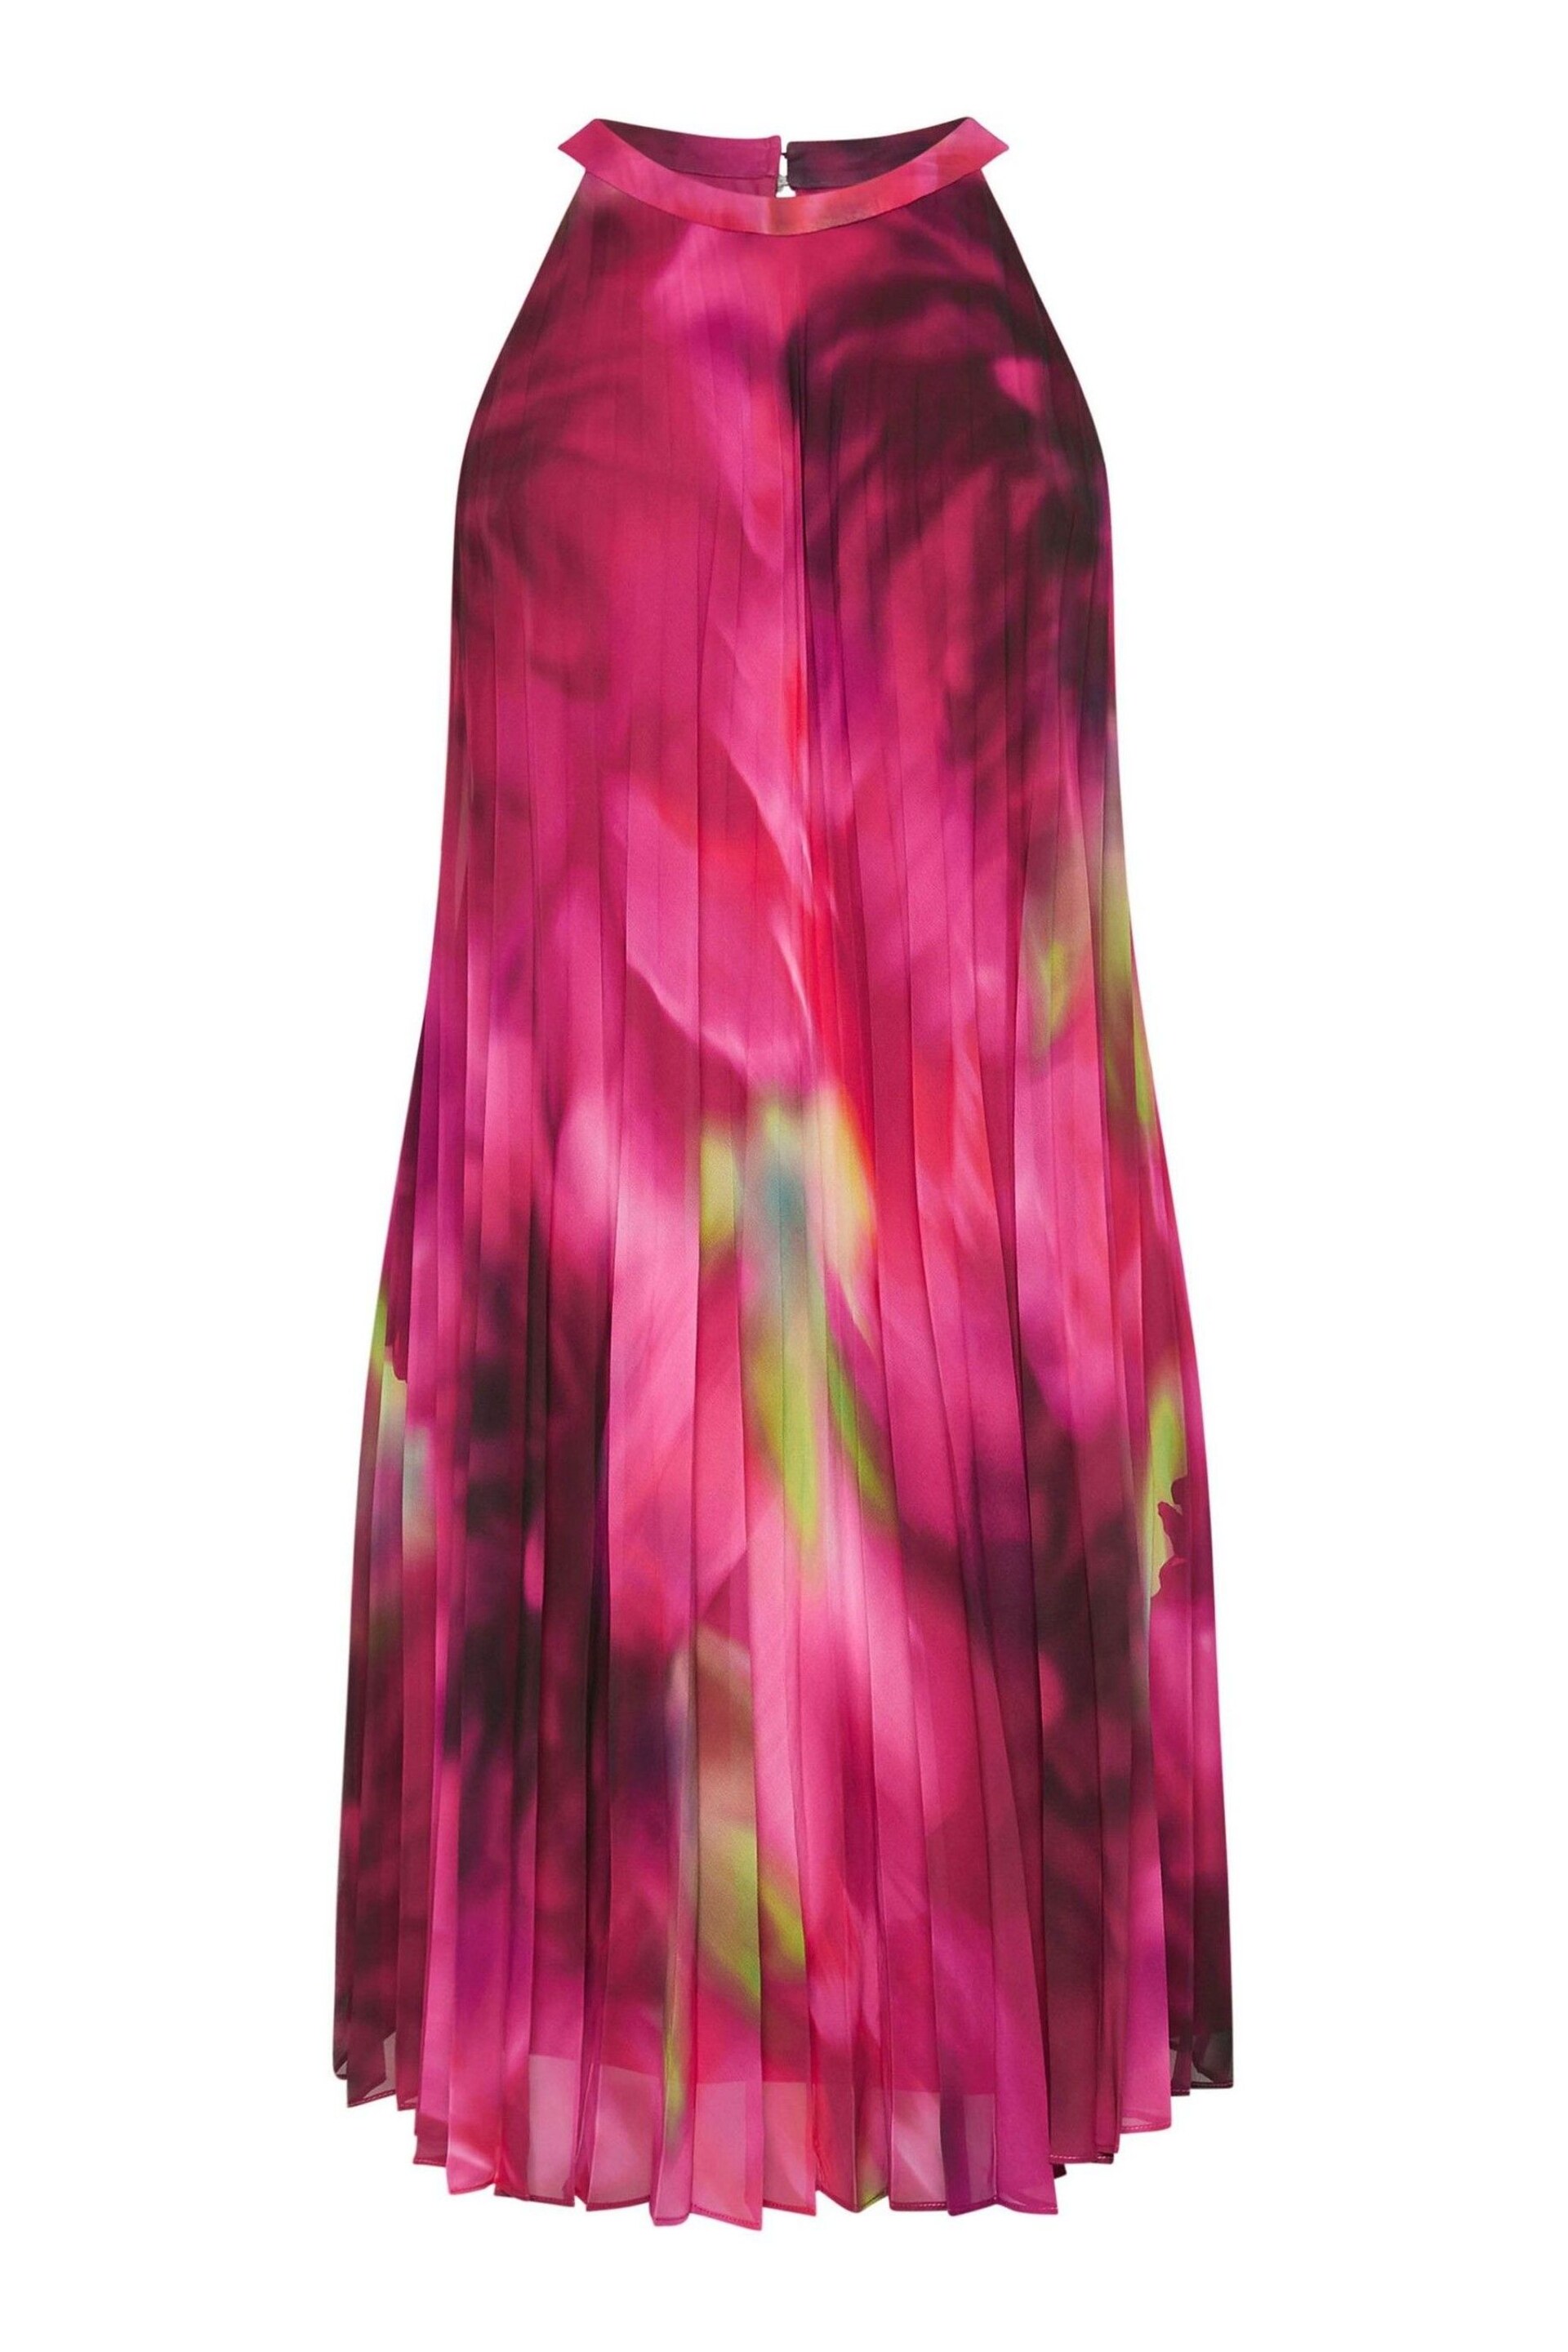 Yours Curve Pink Tropical Print Halter Neck Dress - Image 5 of 5